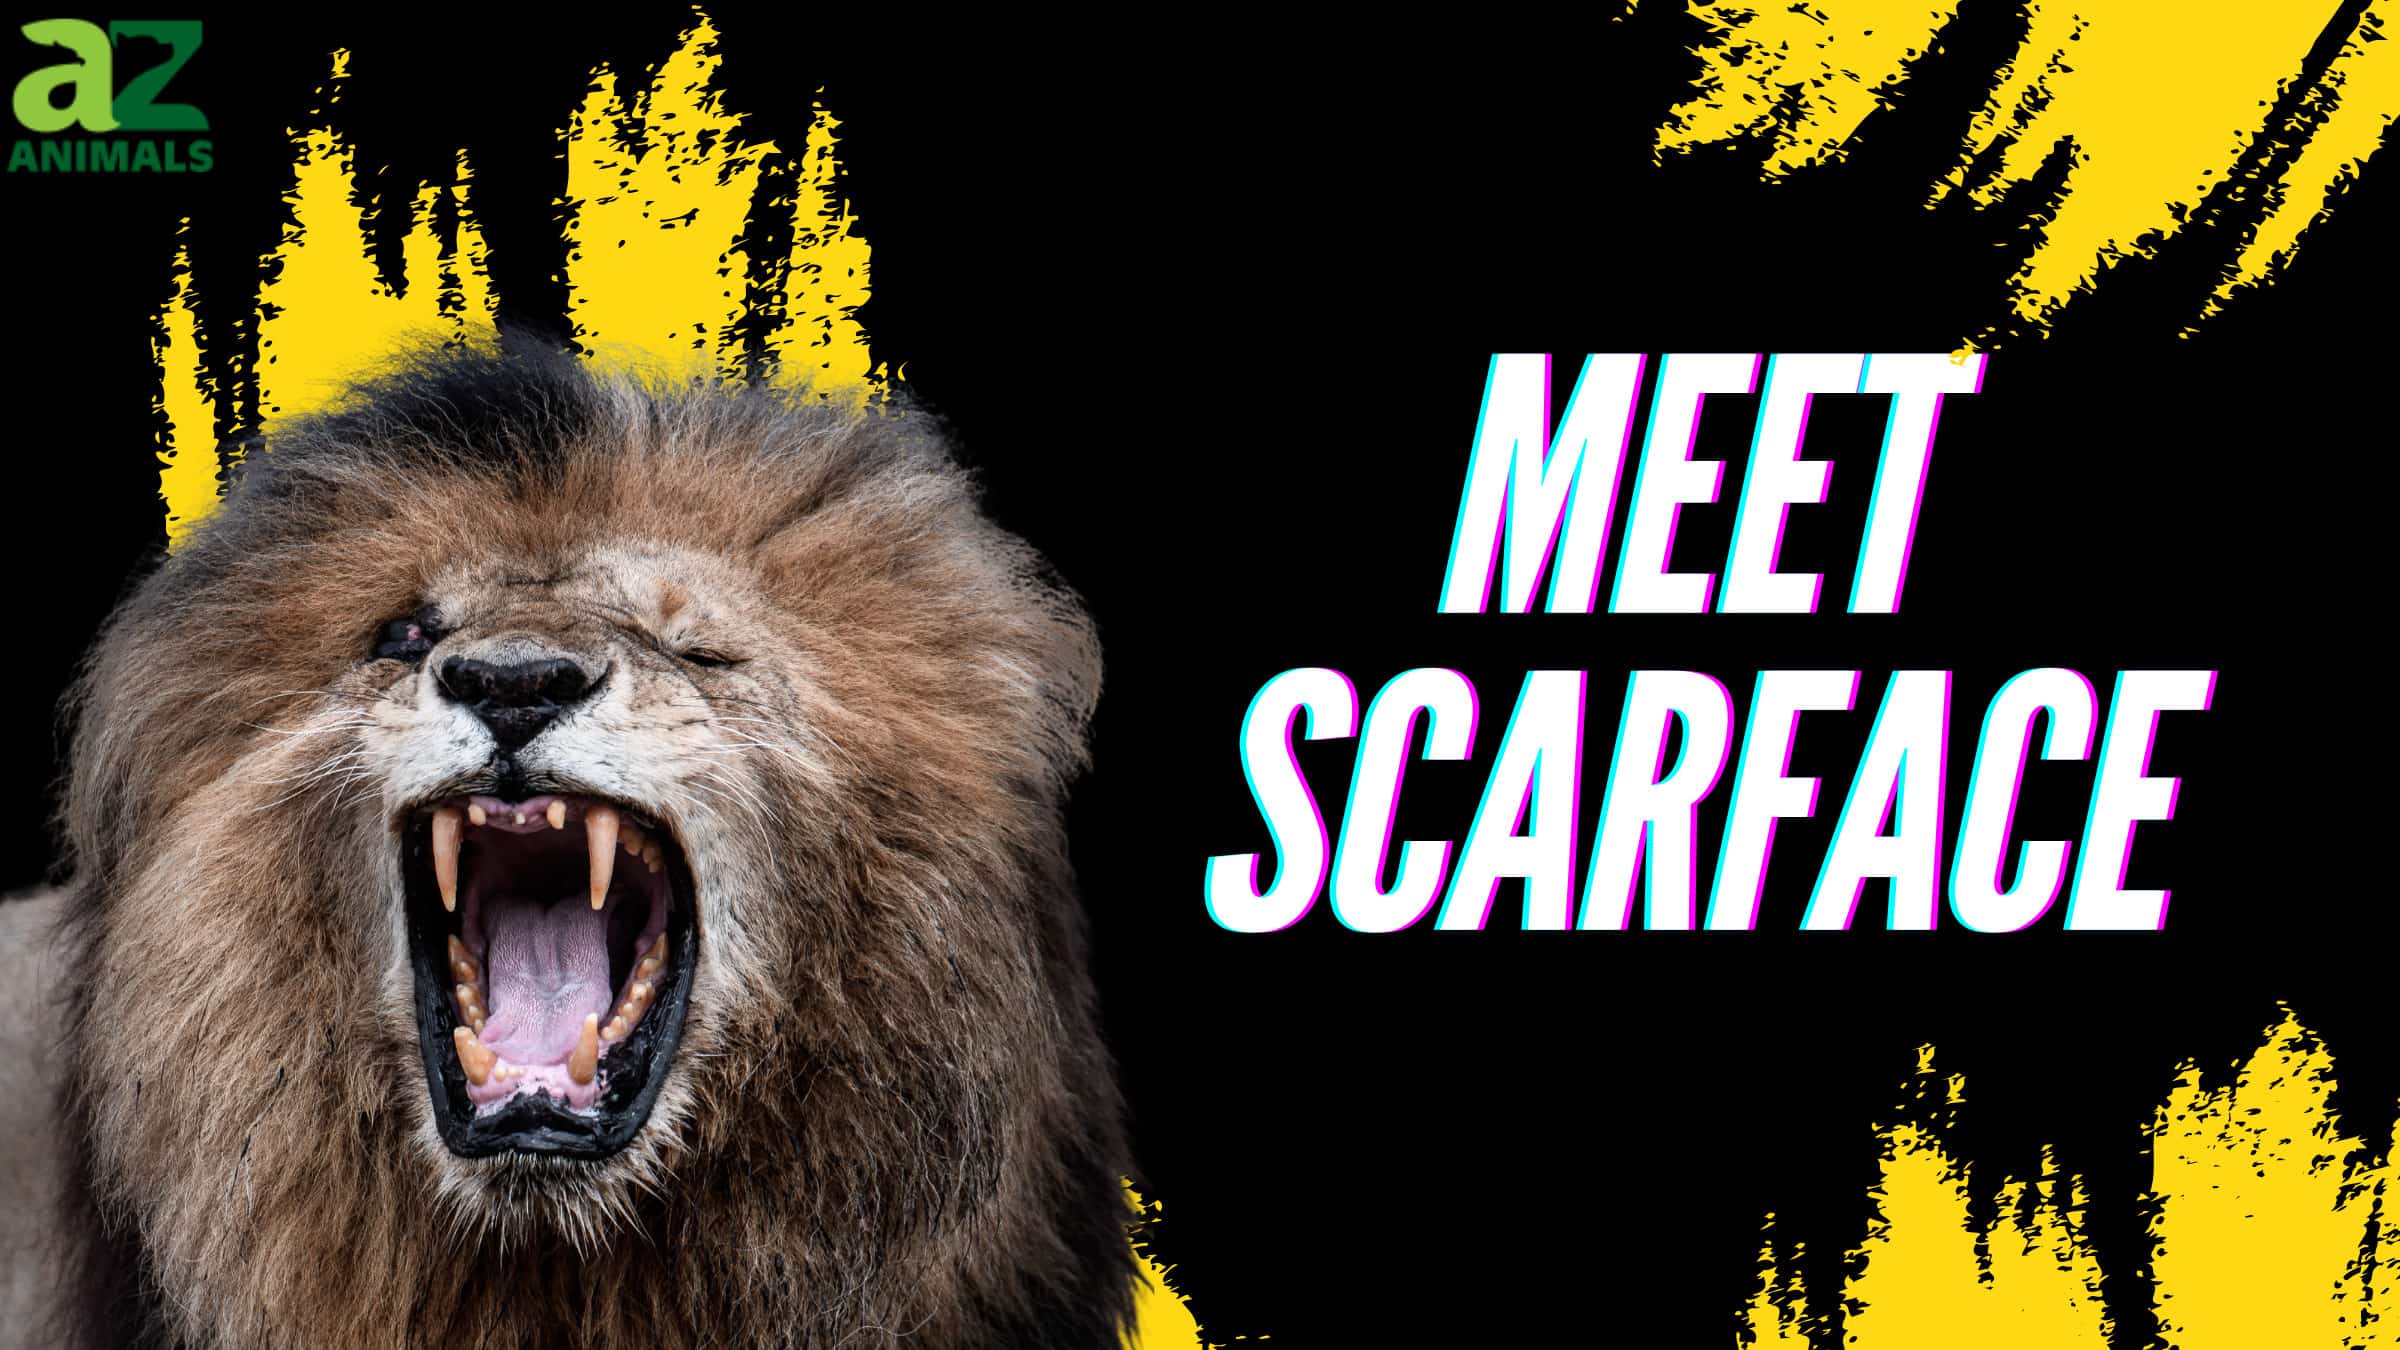 Scarface the Lion